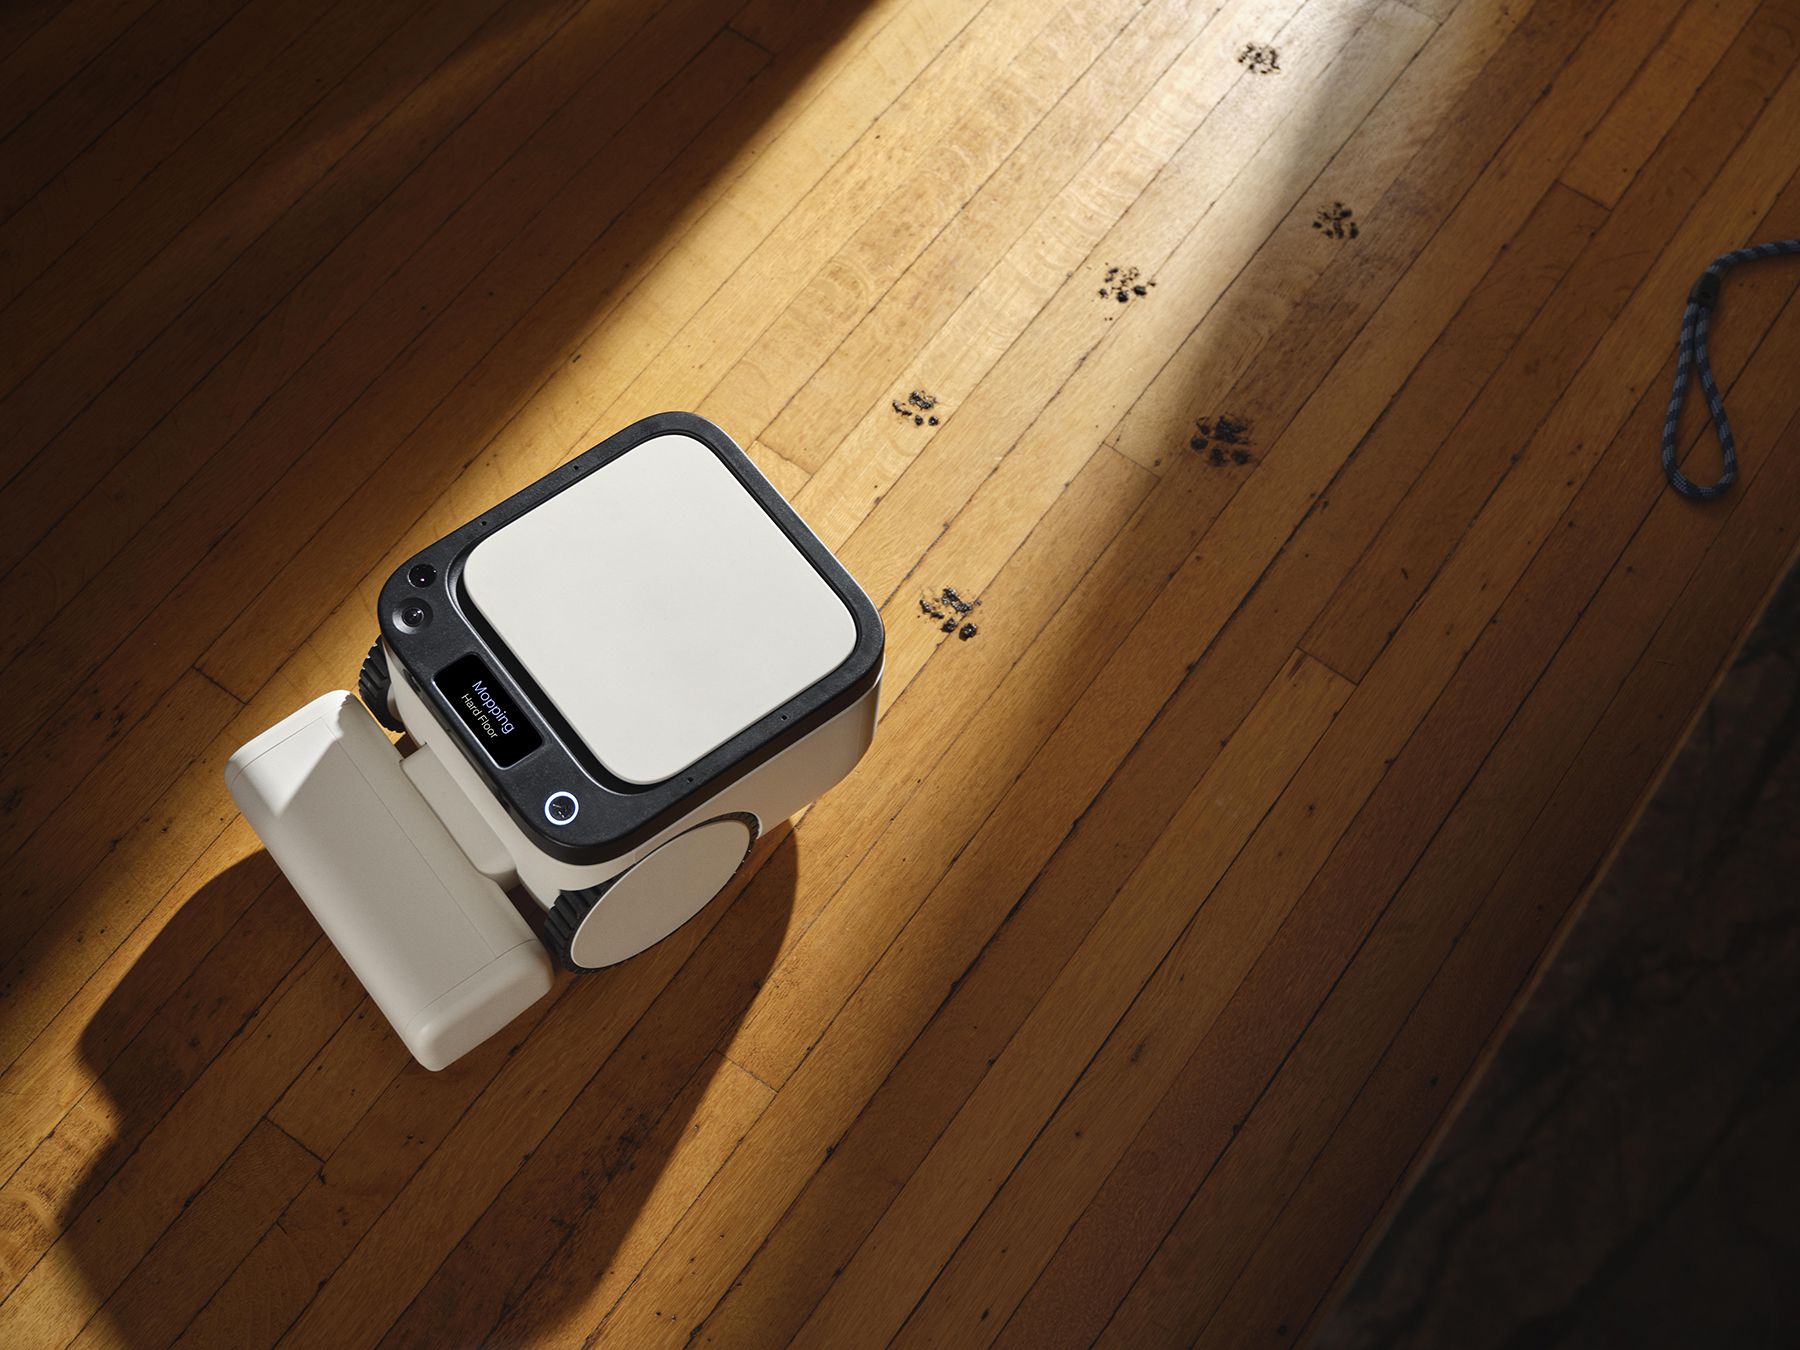 Matic’s Robot Vacuum Provides Privacy With On-Device Mapping